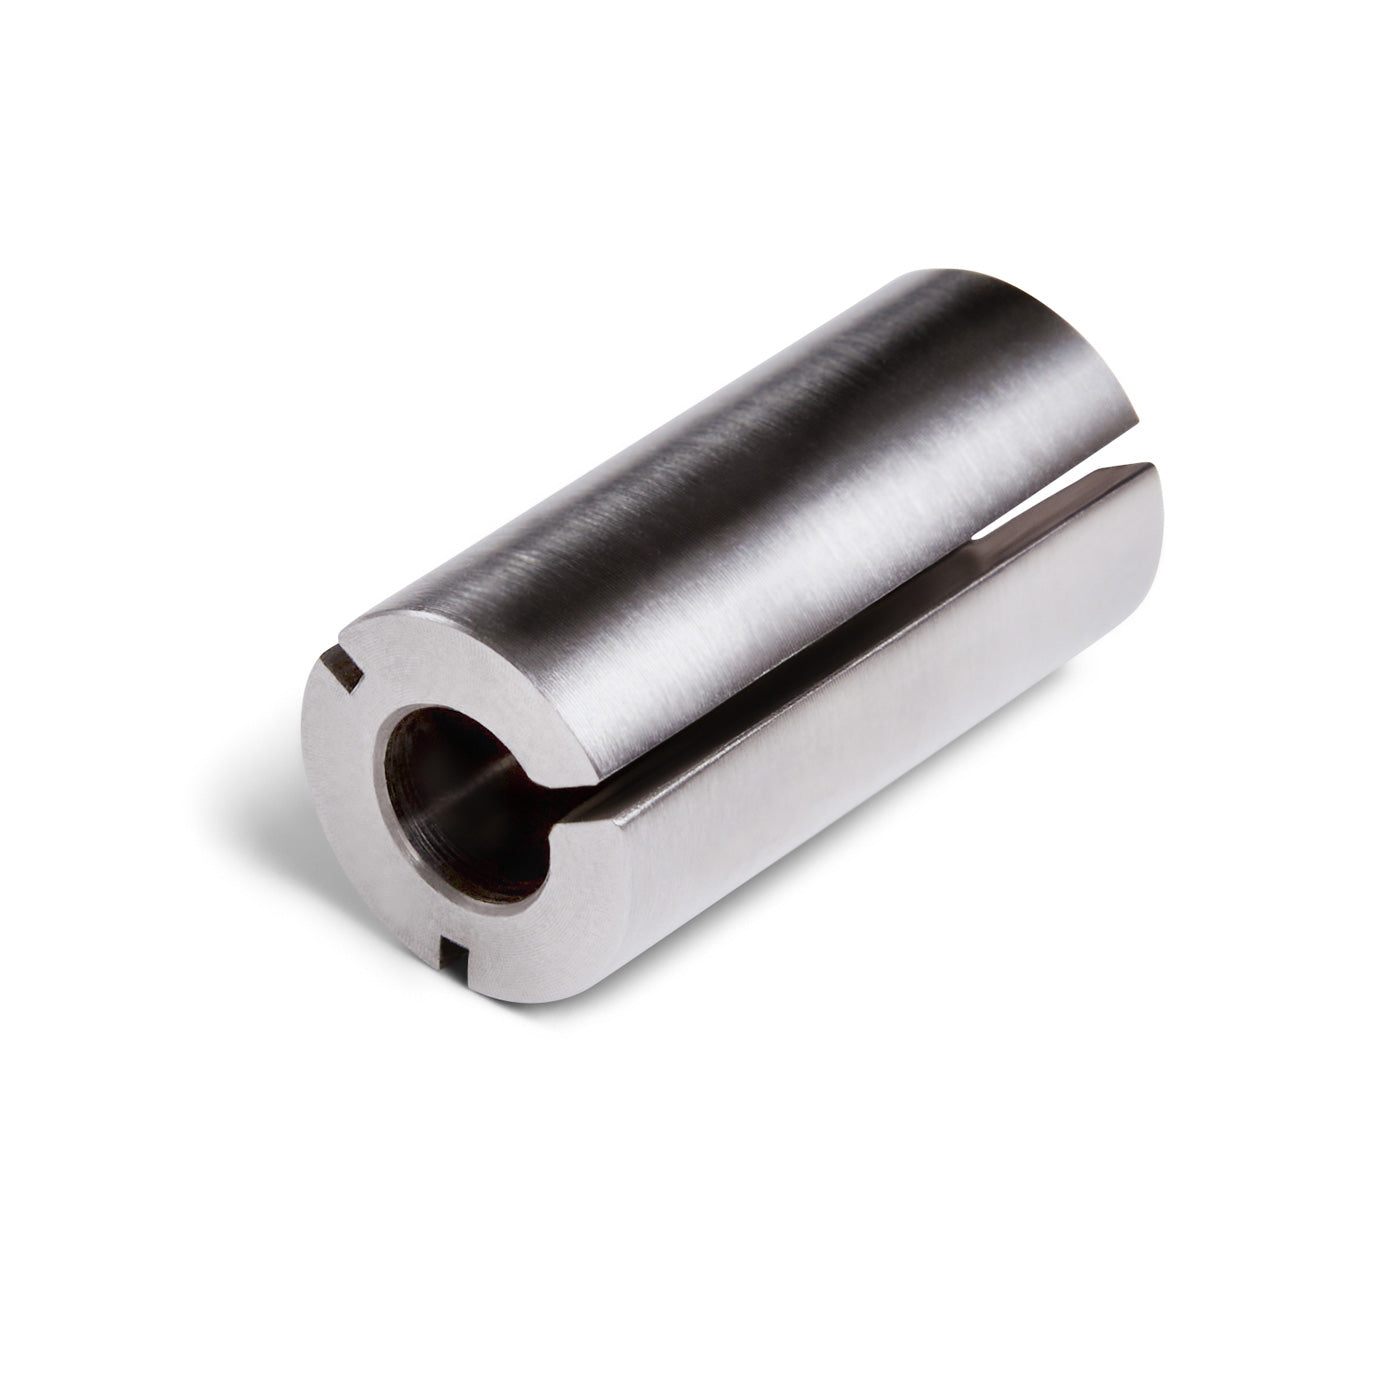 Collet Reduction Sleeve 1/2" to 1/4"